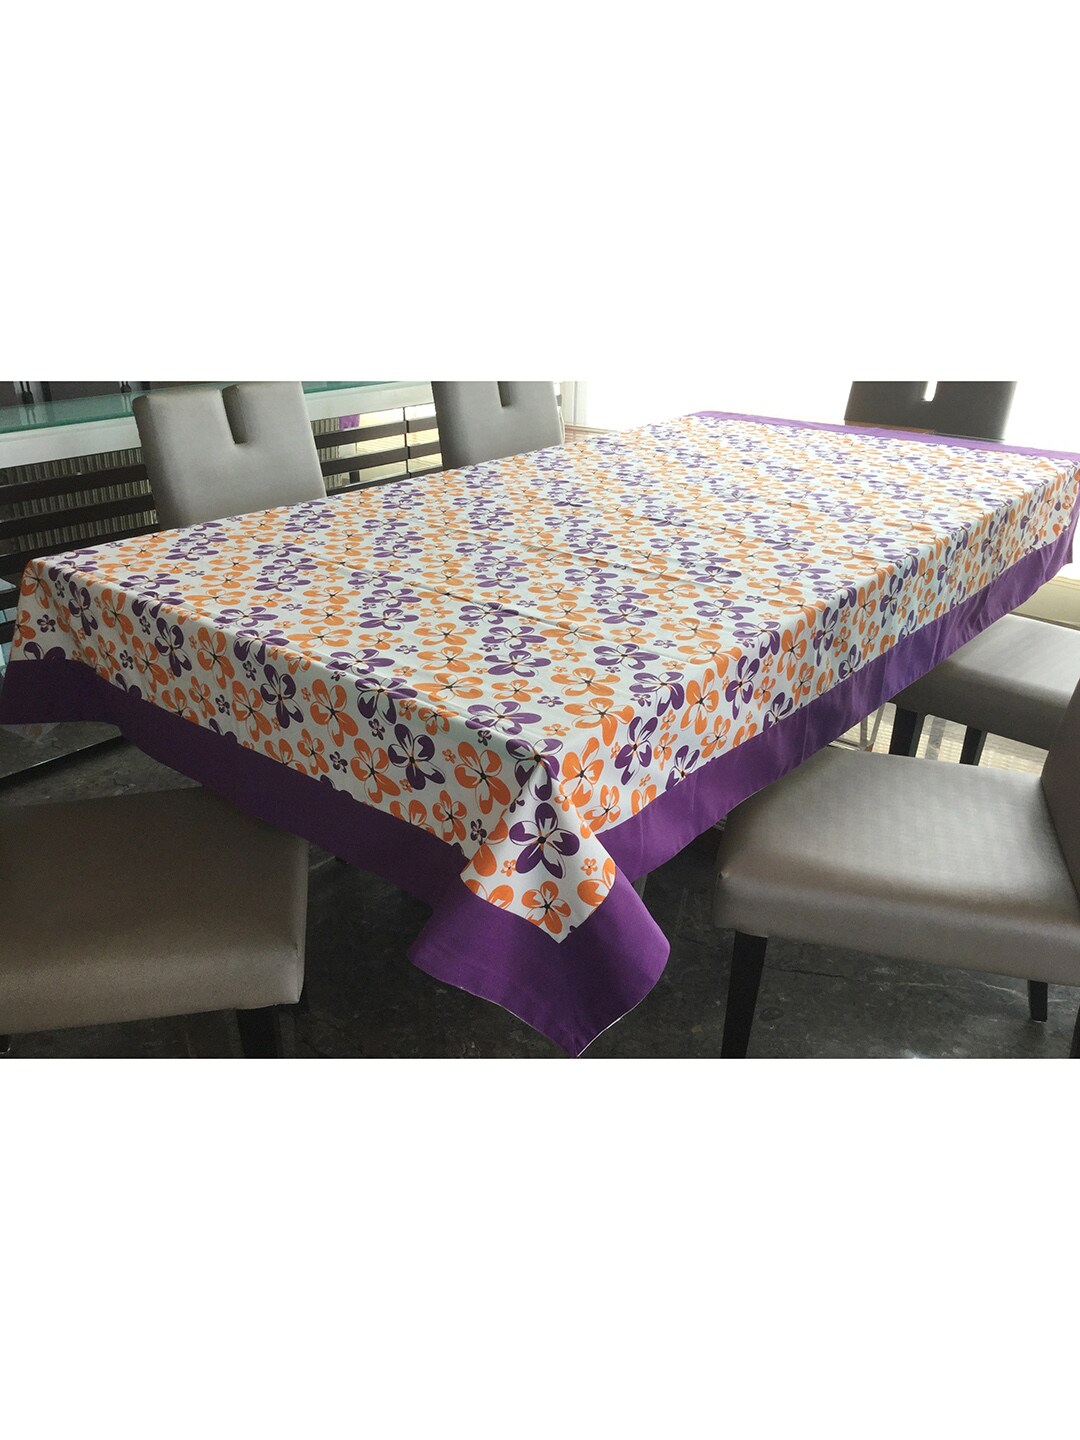 Lushomes Multicoloured Floral Print 8 Seater Table Cloth Price in India